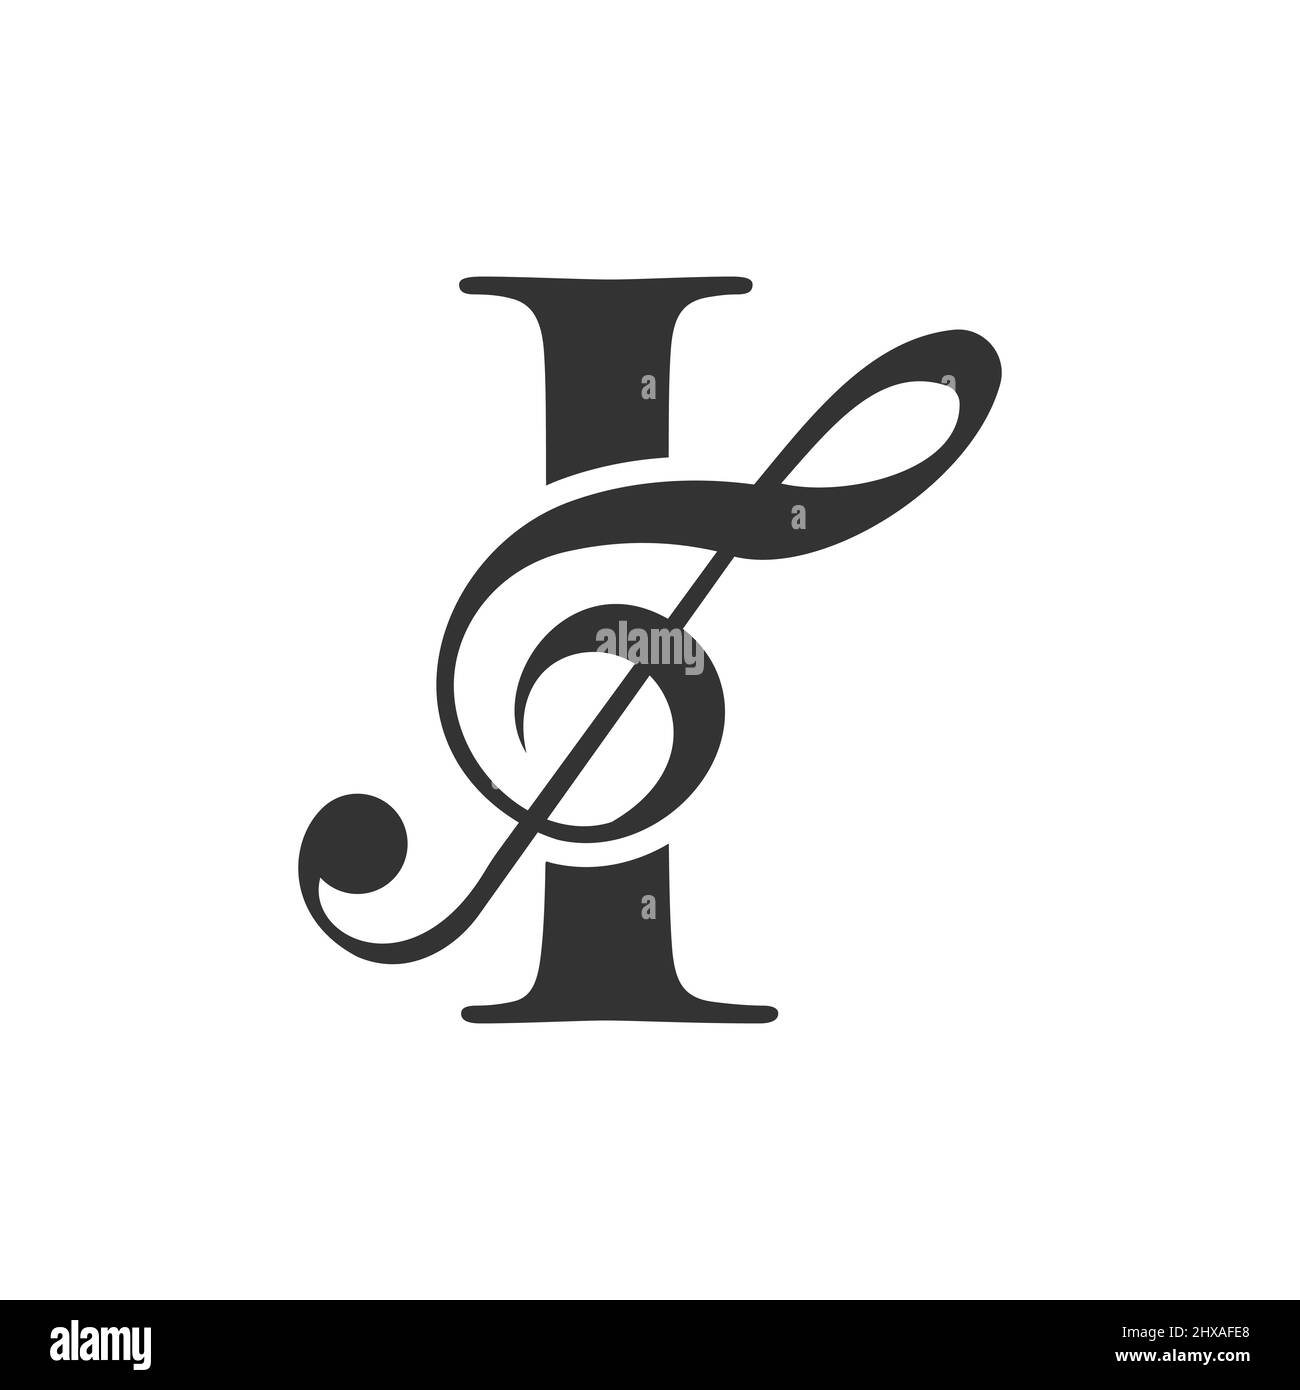 Music Logo On Letter I Concept. I Music Note Sign, Sound Music Melody Template Stock Vector